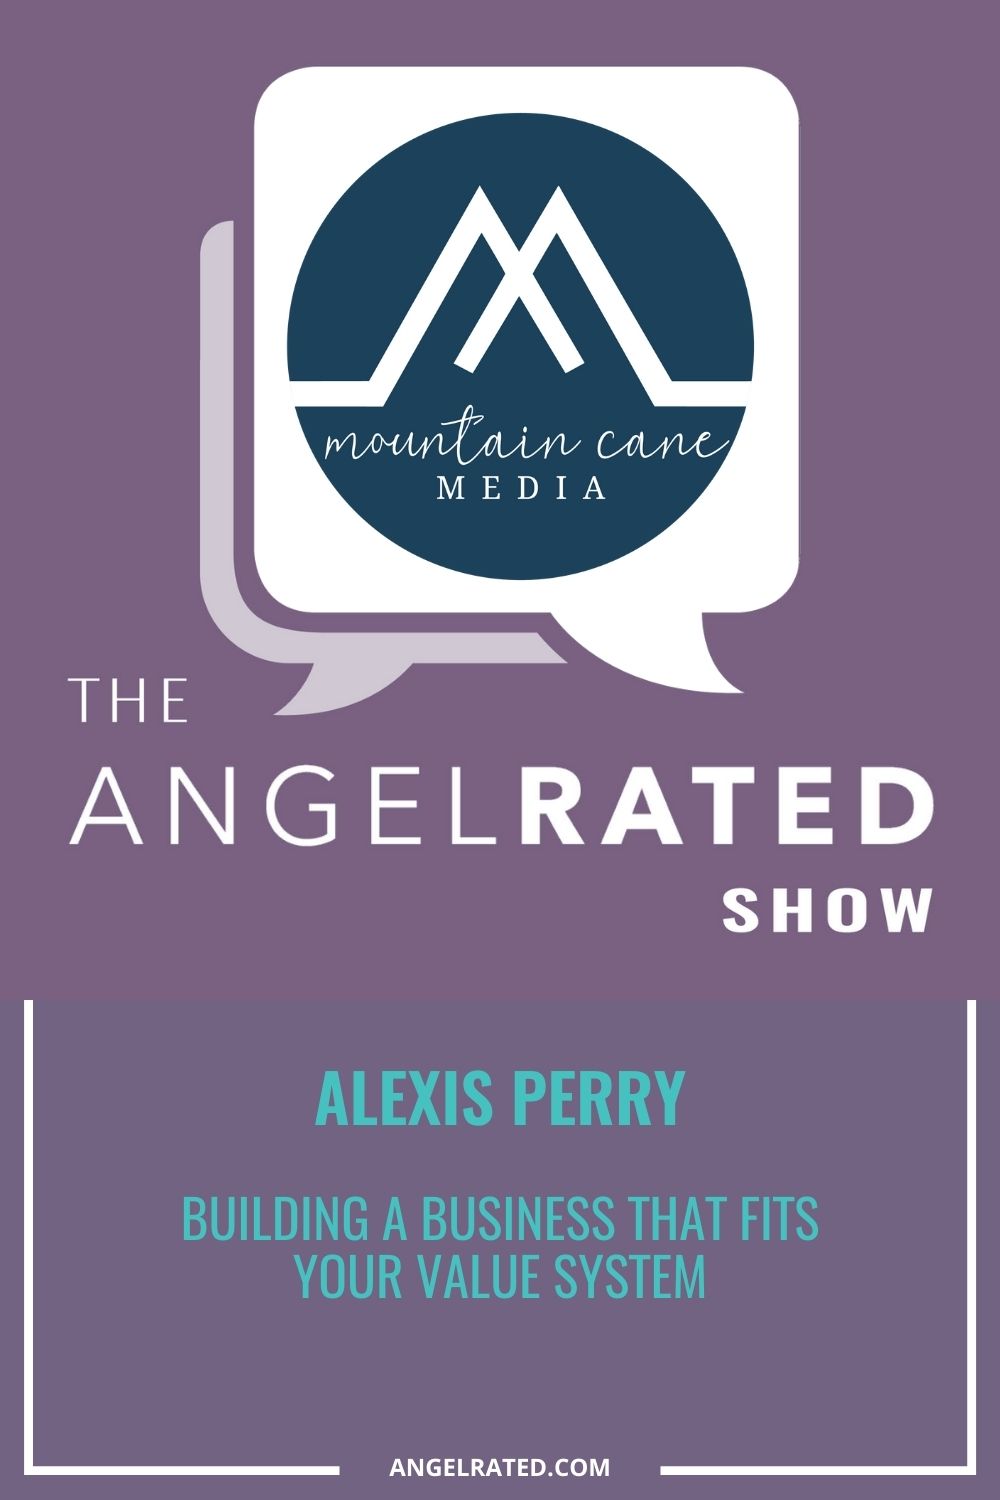 Alexis Perry: Building a business that fits your value system